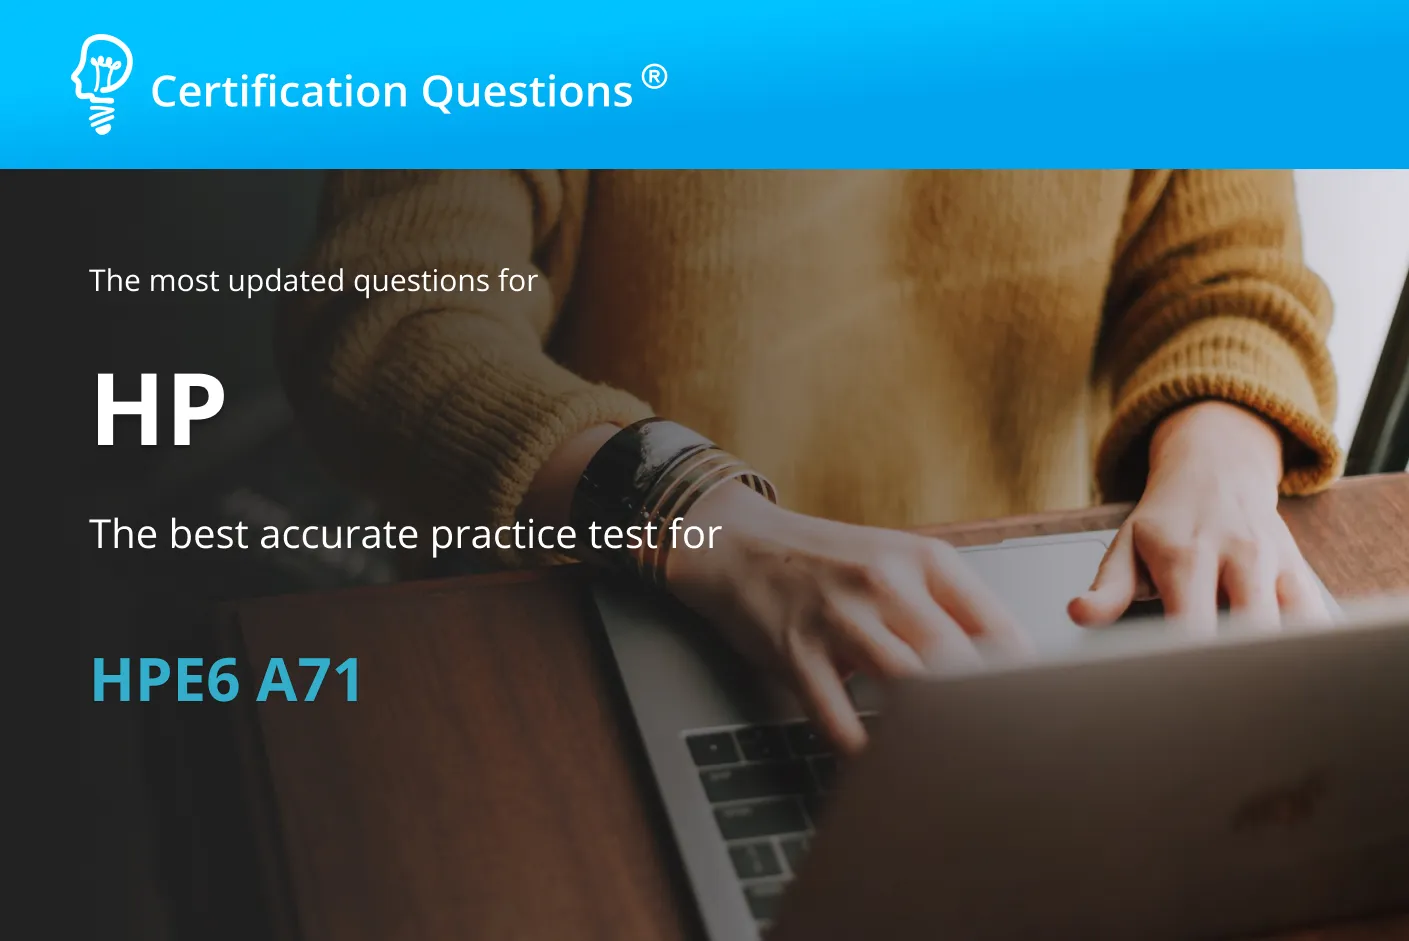 This image is related to HPE6 A71 Practice Test in the USA